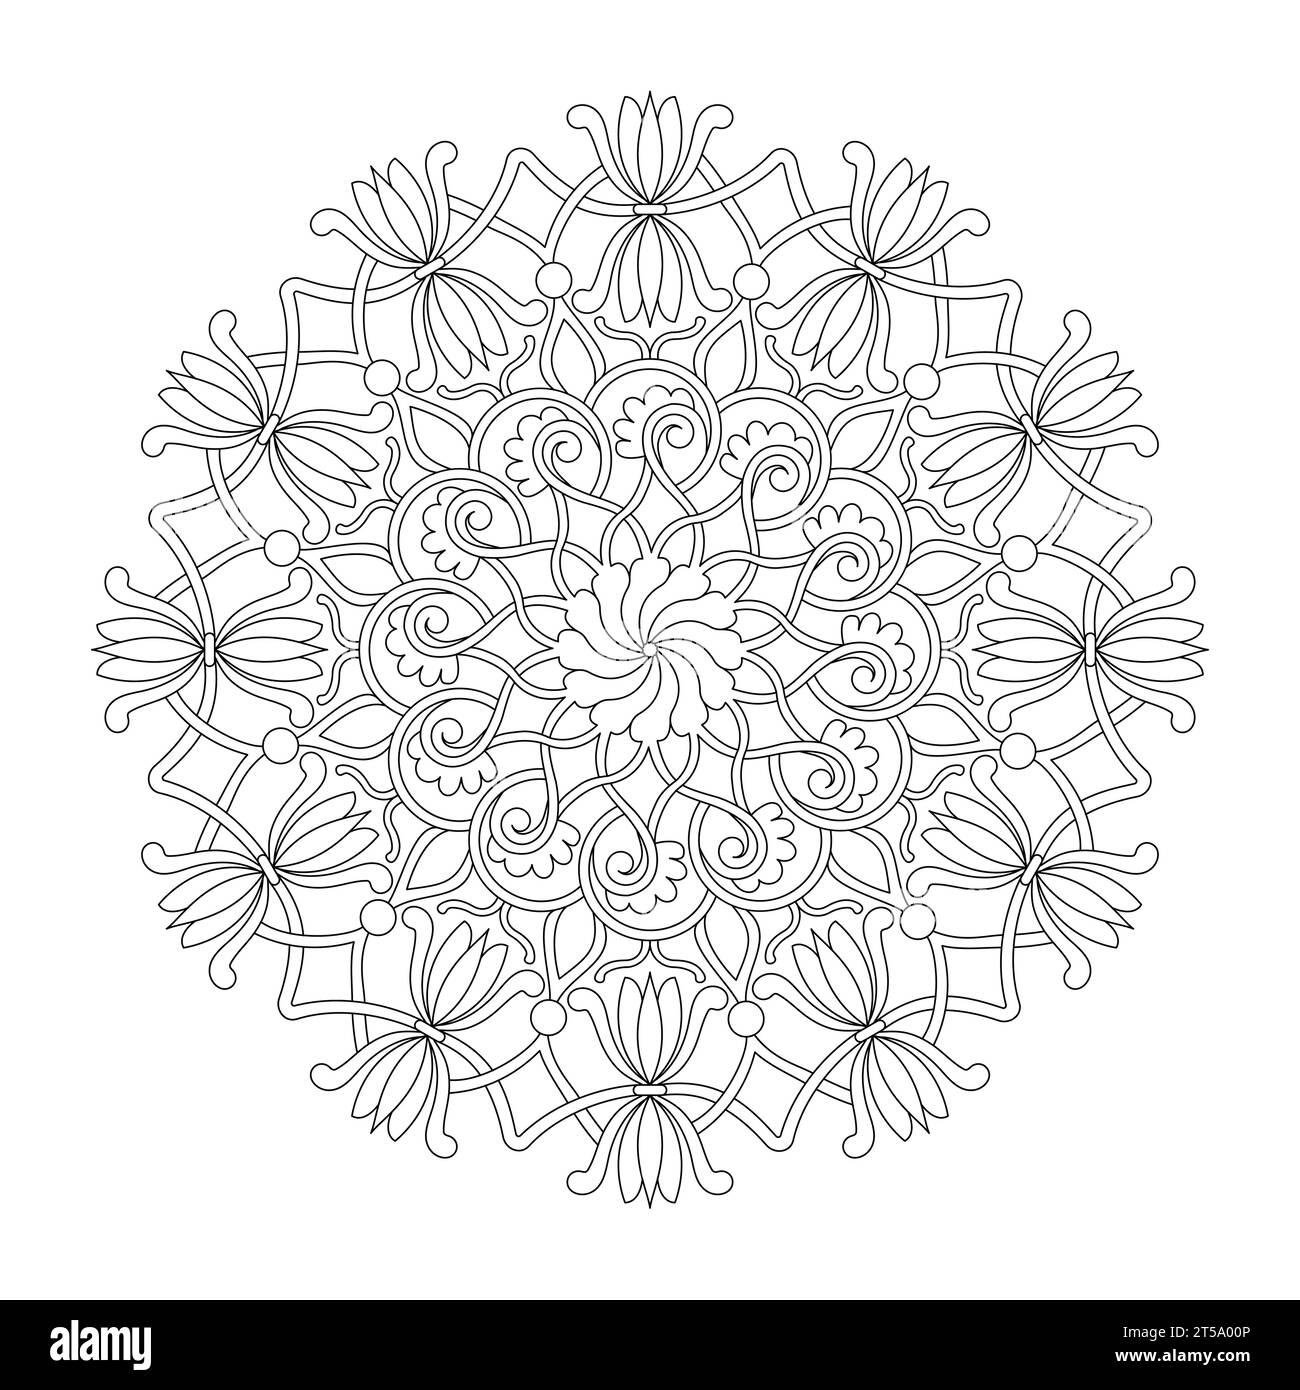 Celtic Mandala enigmatic delight adult colouring book page for KDP book interior. Peaceful Petals, Ability to Relax, Brain Experiences, Harmonious Have Stock Vector